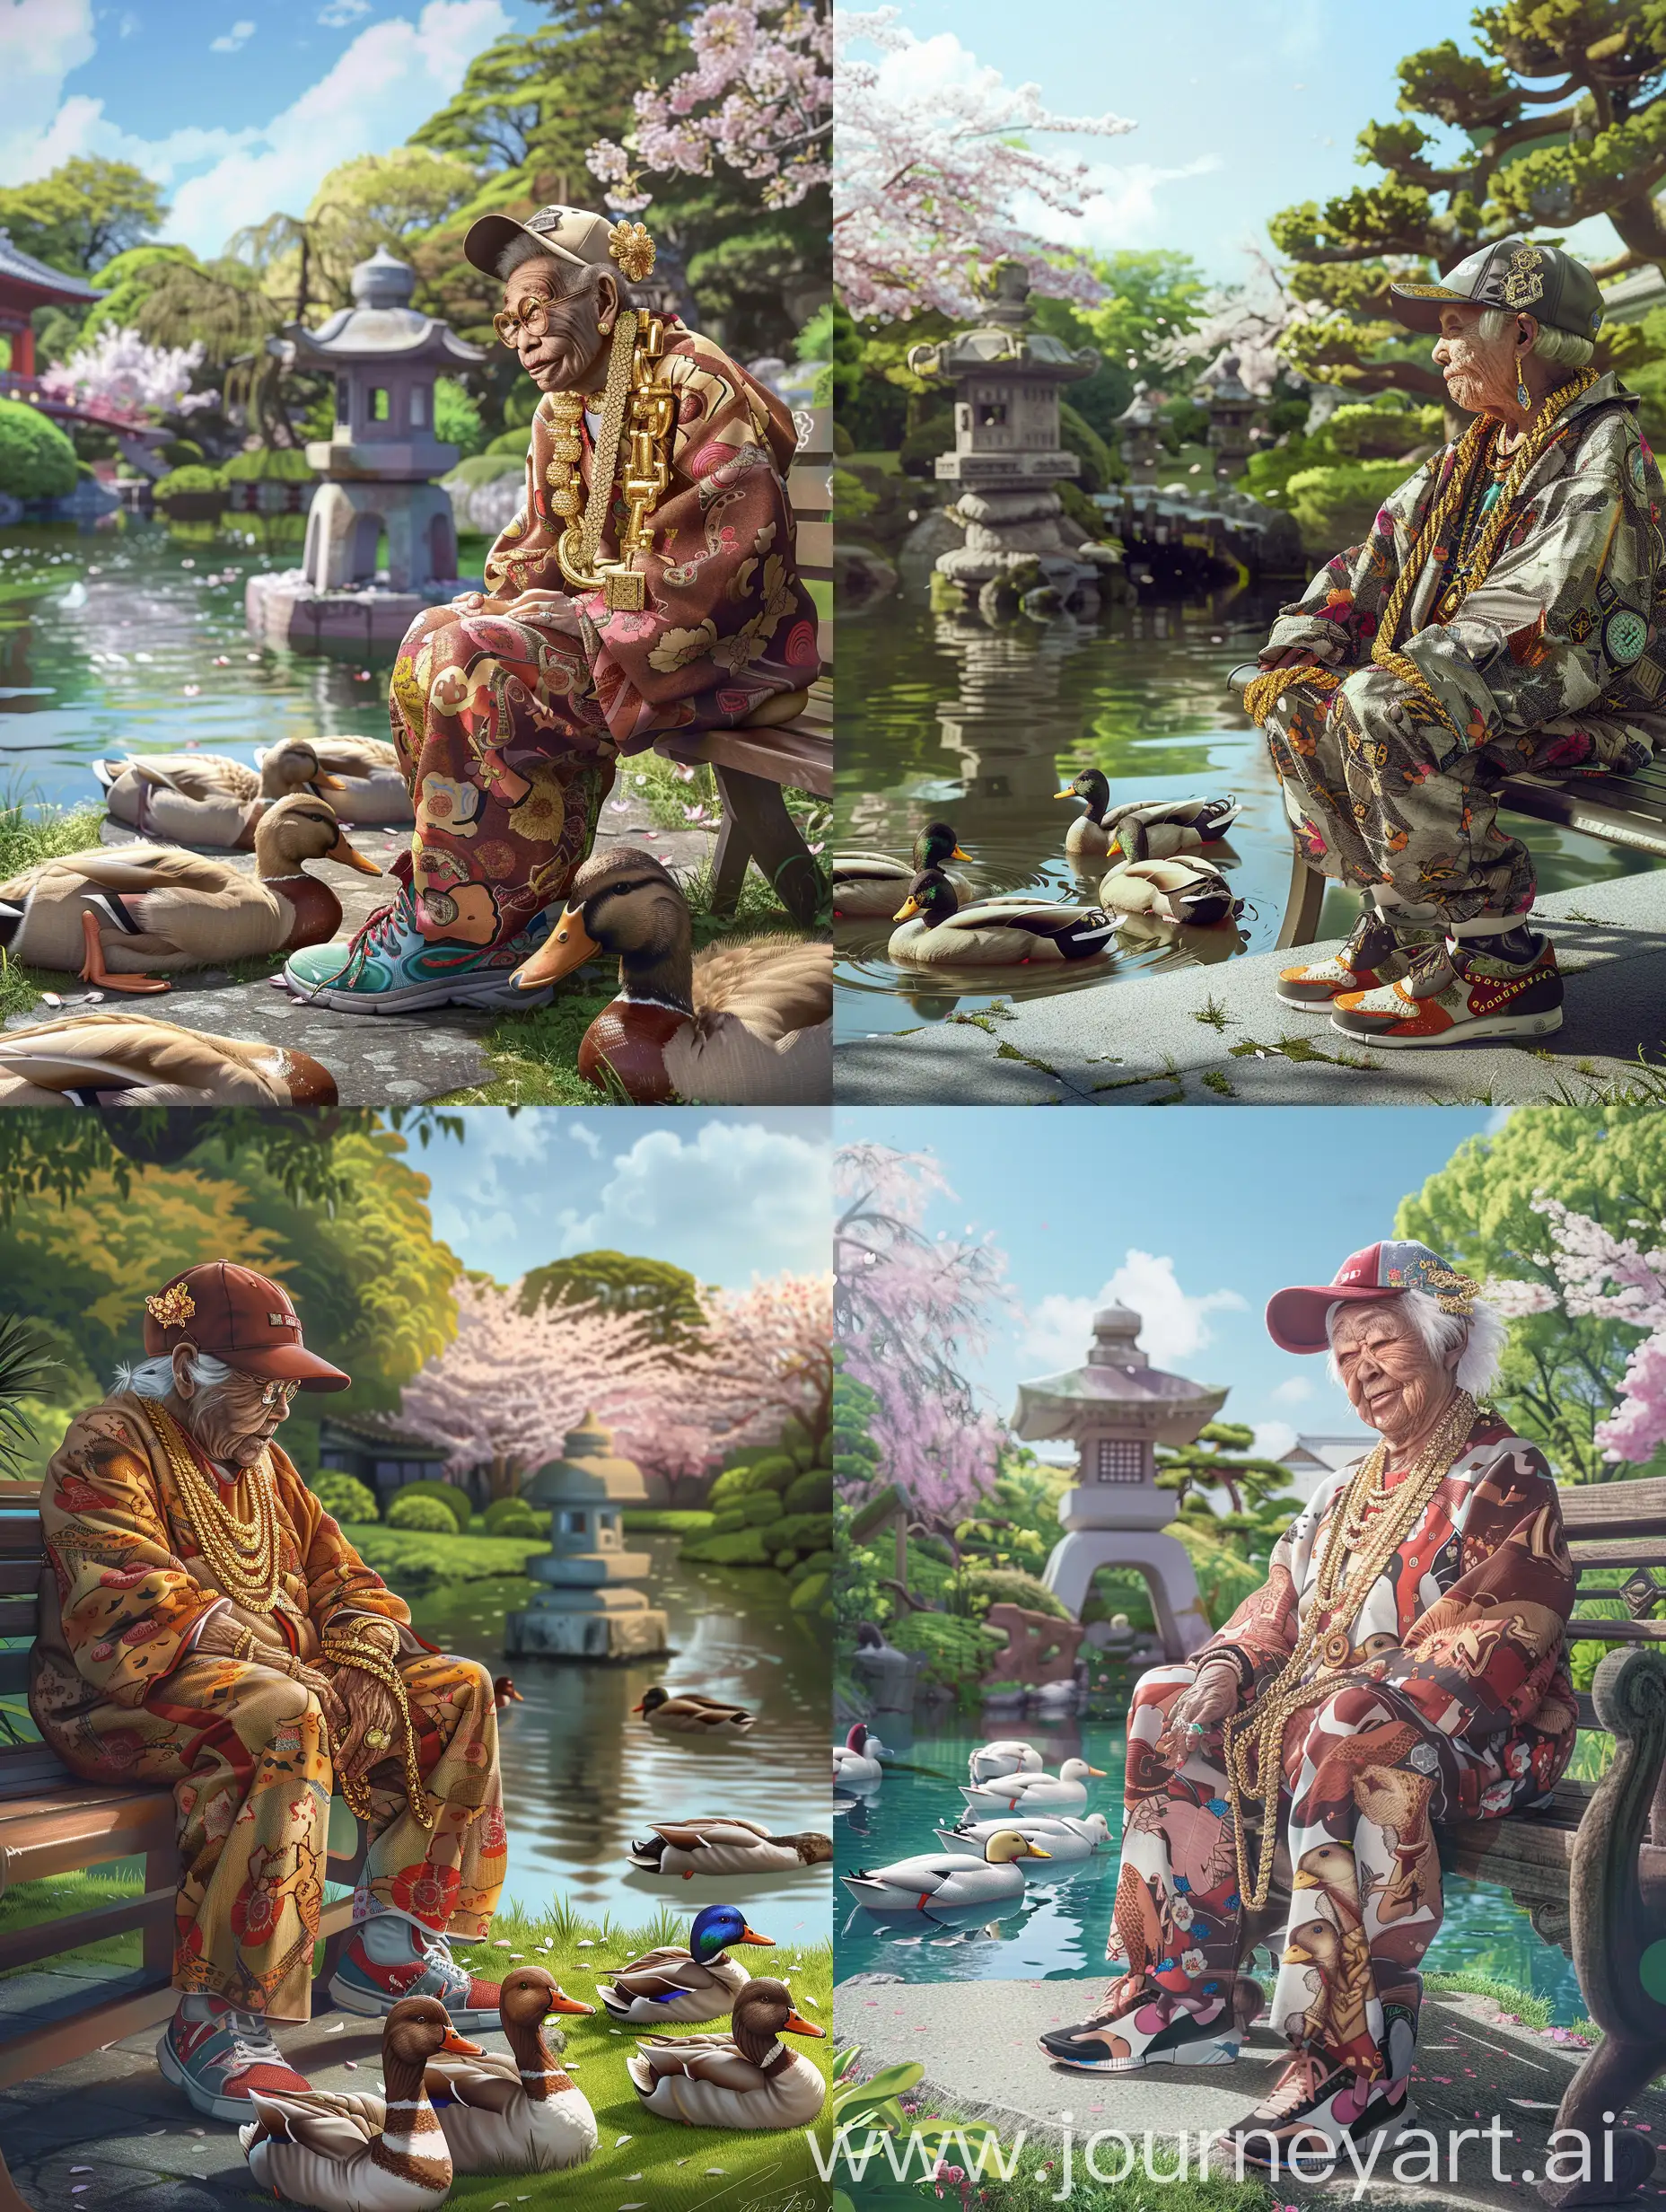 Create a vibrant and whimsical image featuring an elderly Japanese woman dressed in full rapper attire. She should be wearing a flashy tracksuit, oversized gold chains, a baseball cap turned sideways, and stylish sneakers. She may also have some traditional Japanese elements, like a kanzashi (hairpin) in her hair or a kimono pattern integrated into her tracksuit design. The setting is a serene pond in a traditional Japanese garden, where several ducks are napping peacefully. The woman is sitting on a bench or standing nearby, looking at the ducks with a wide, mischievous smile on her face. The background should include lush greenery, cherry blossoms, a stone lantern, and a clear blue sky with gentle sunlight reflecting off the water. The overall mood of the image should be playful and humorous, blending the serene natural environment with the surprising and entertaining sight of a grandmother in rapper clothing.